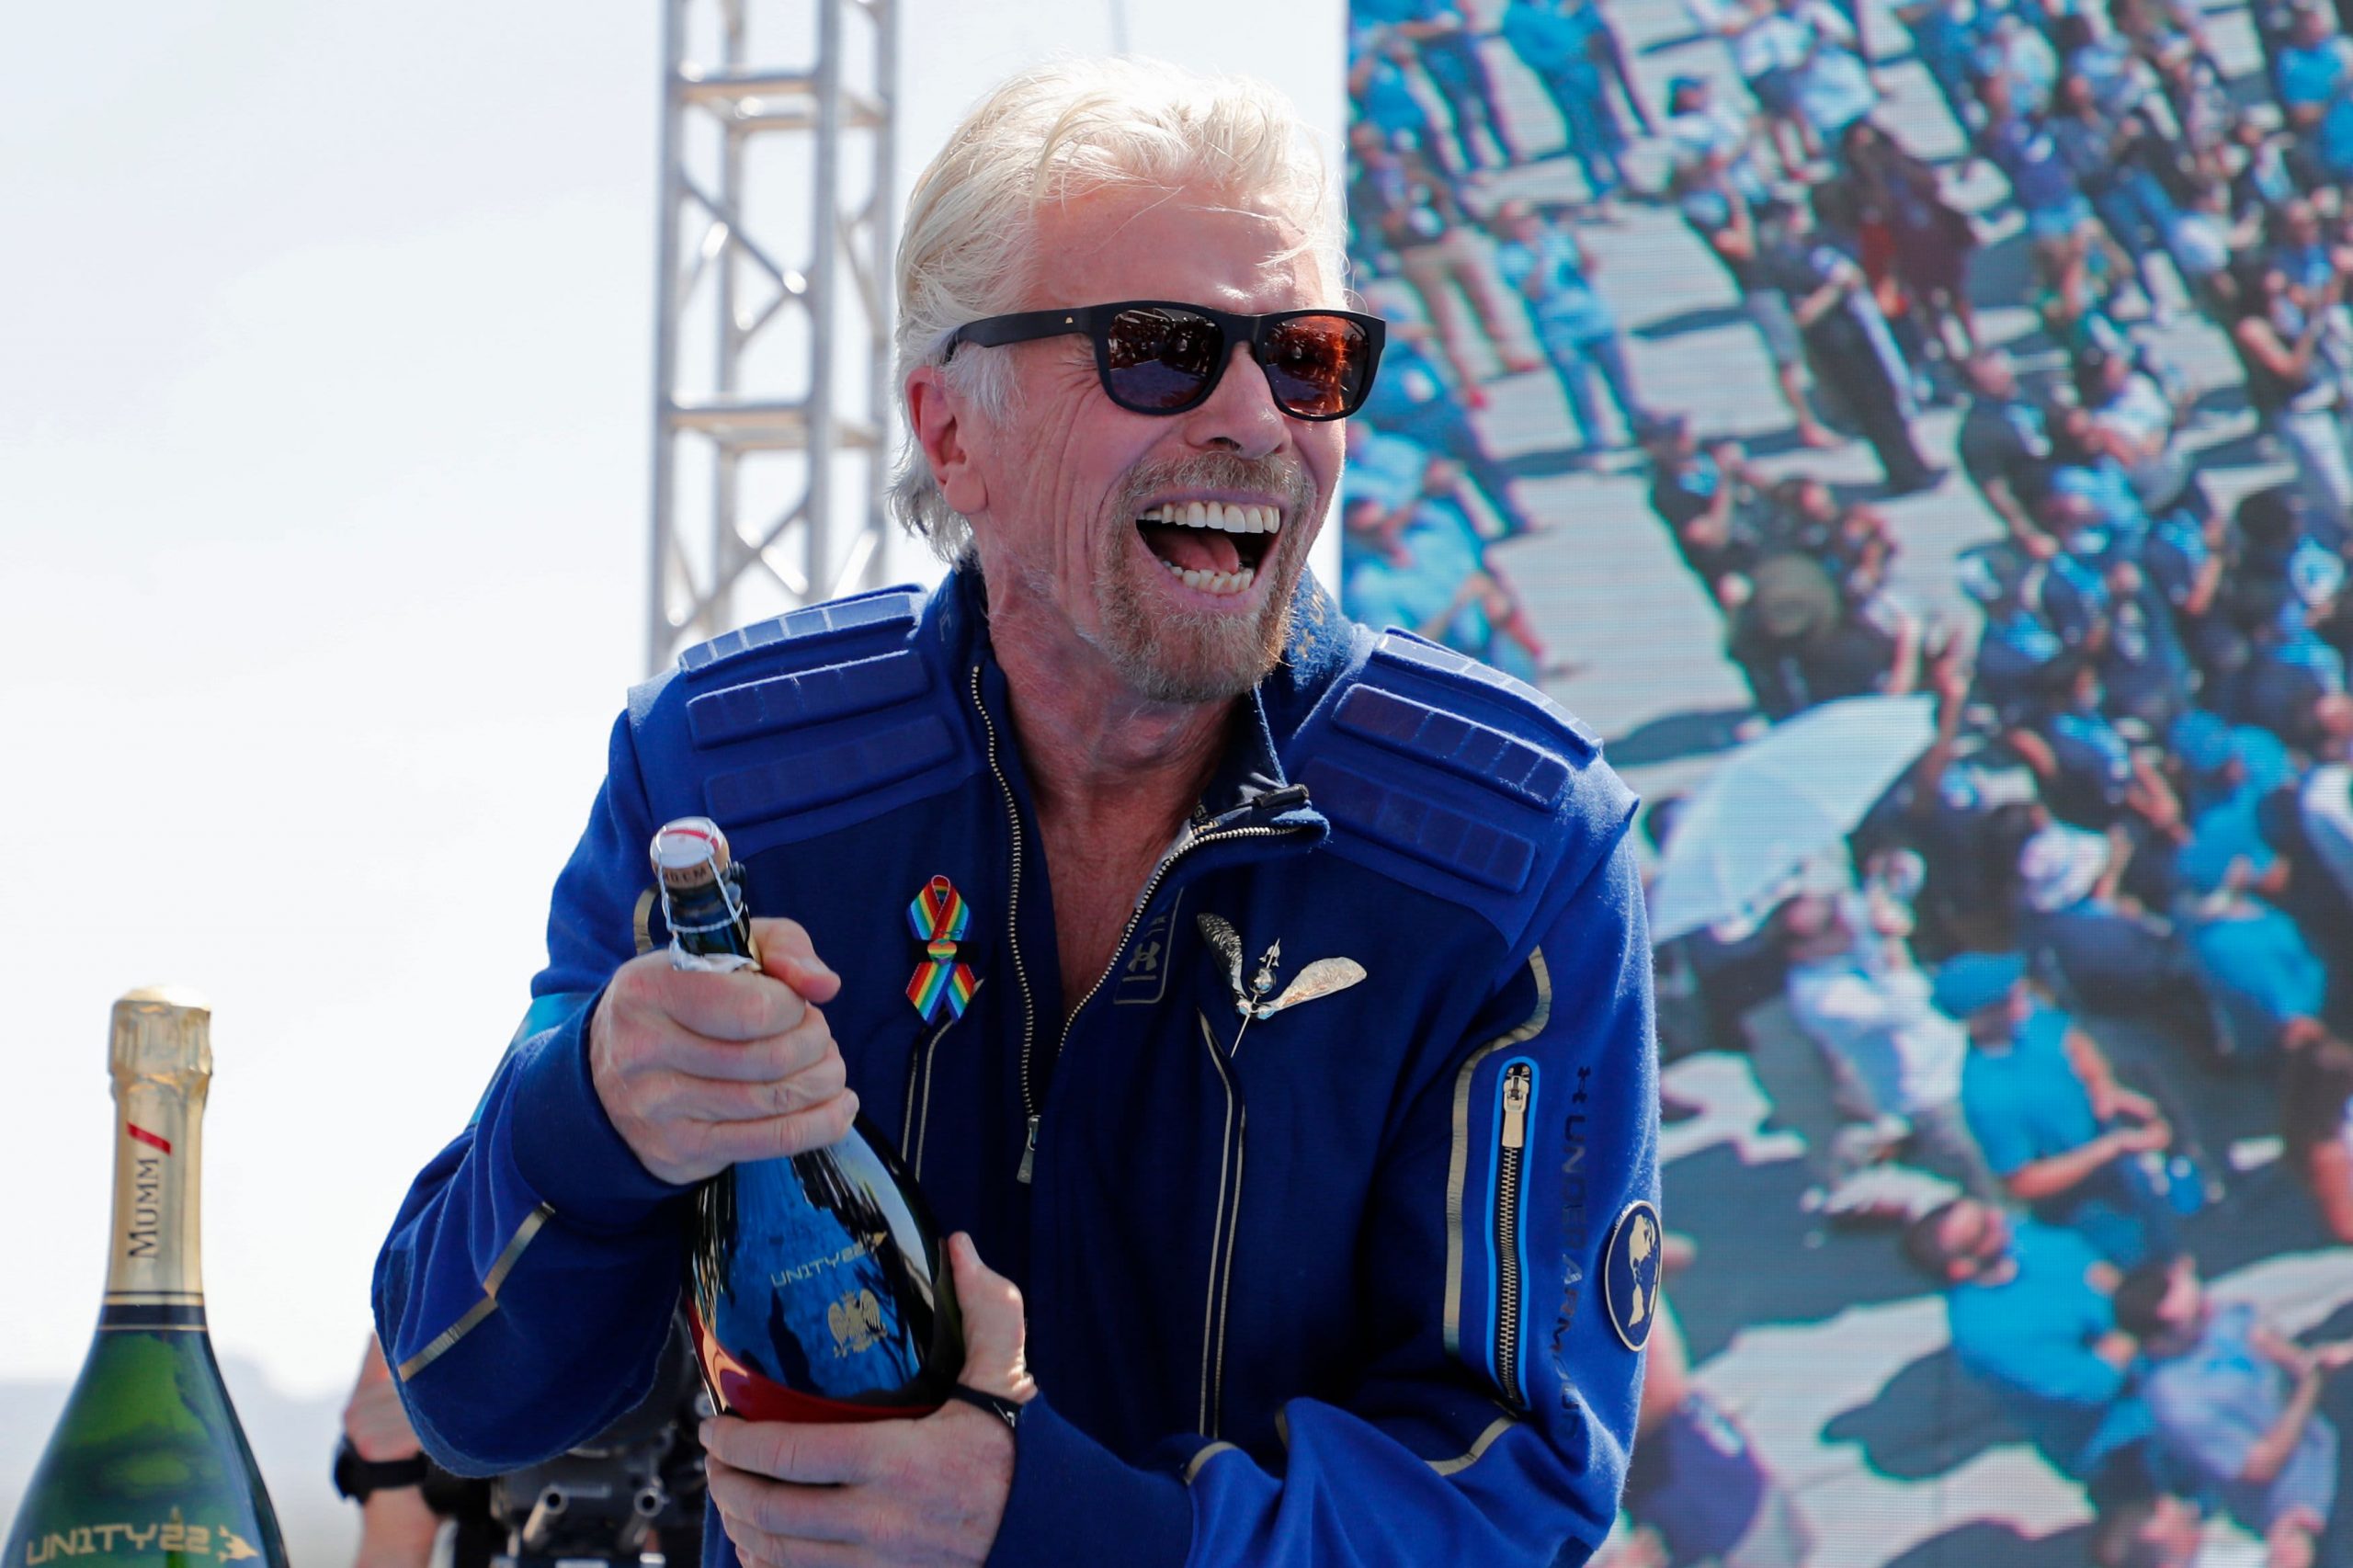 NASA chief says Richard Branson's flight was a great milestone in human space exploration